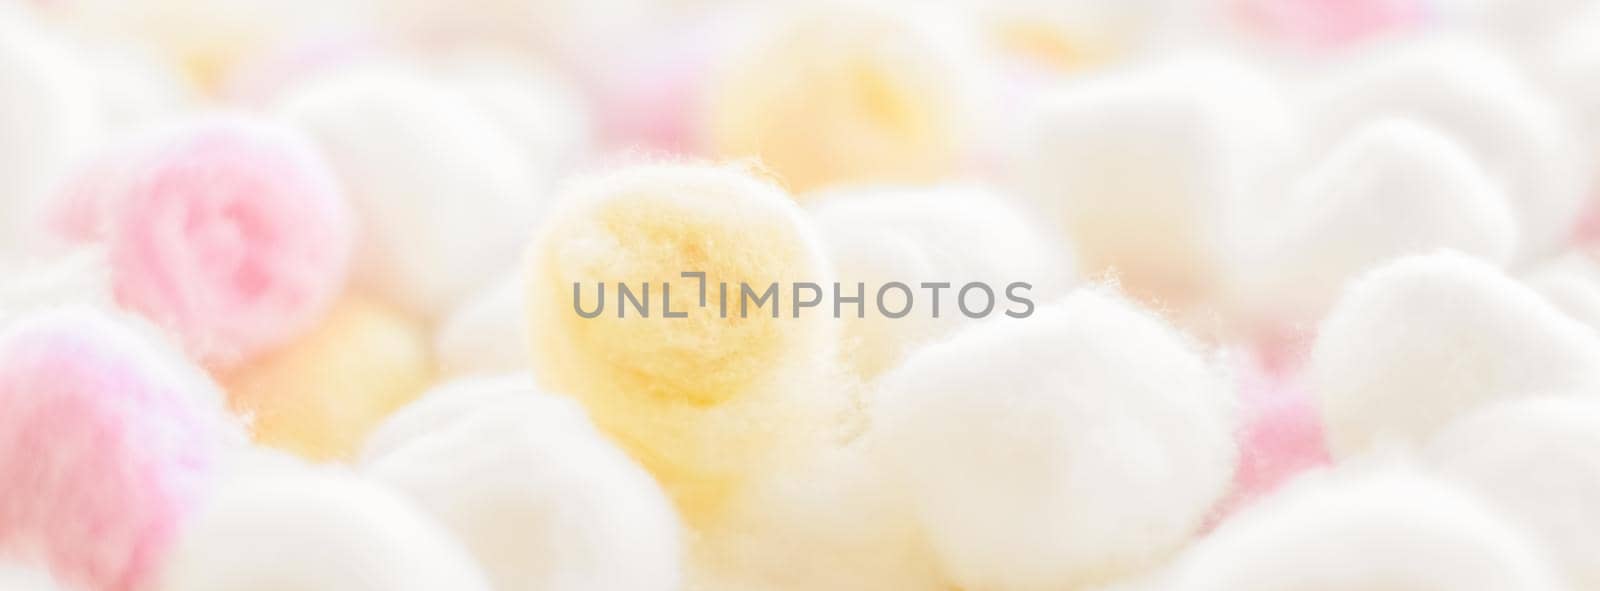 Cosmetology, branding and cleanliness concept - Organic cotton balls background for morning routine, spa cosmetics, hygiene and natural skincare beauty brand product as healthcare and medical design